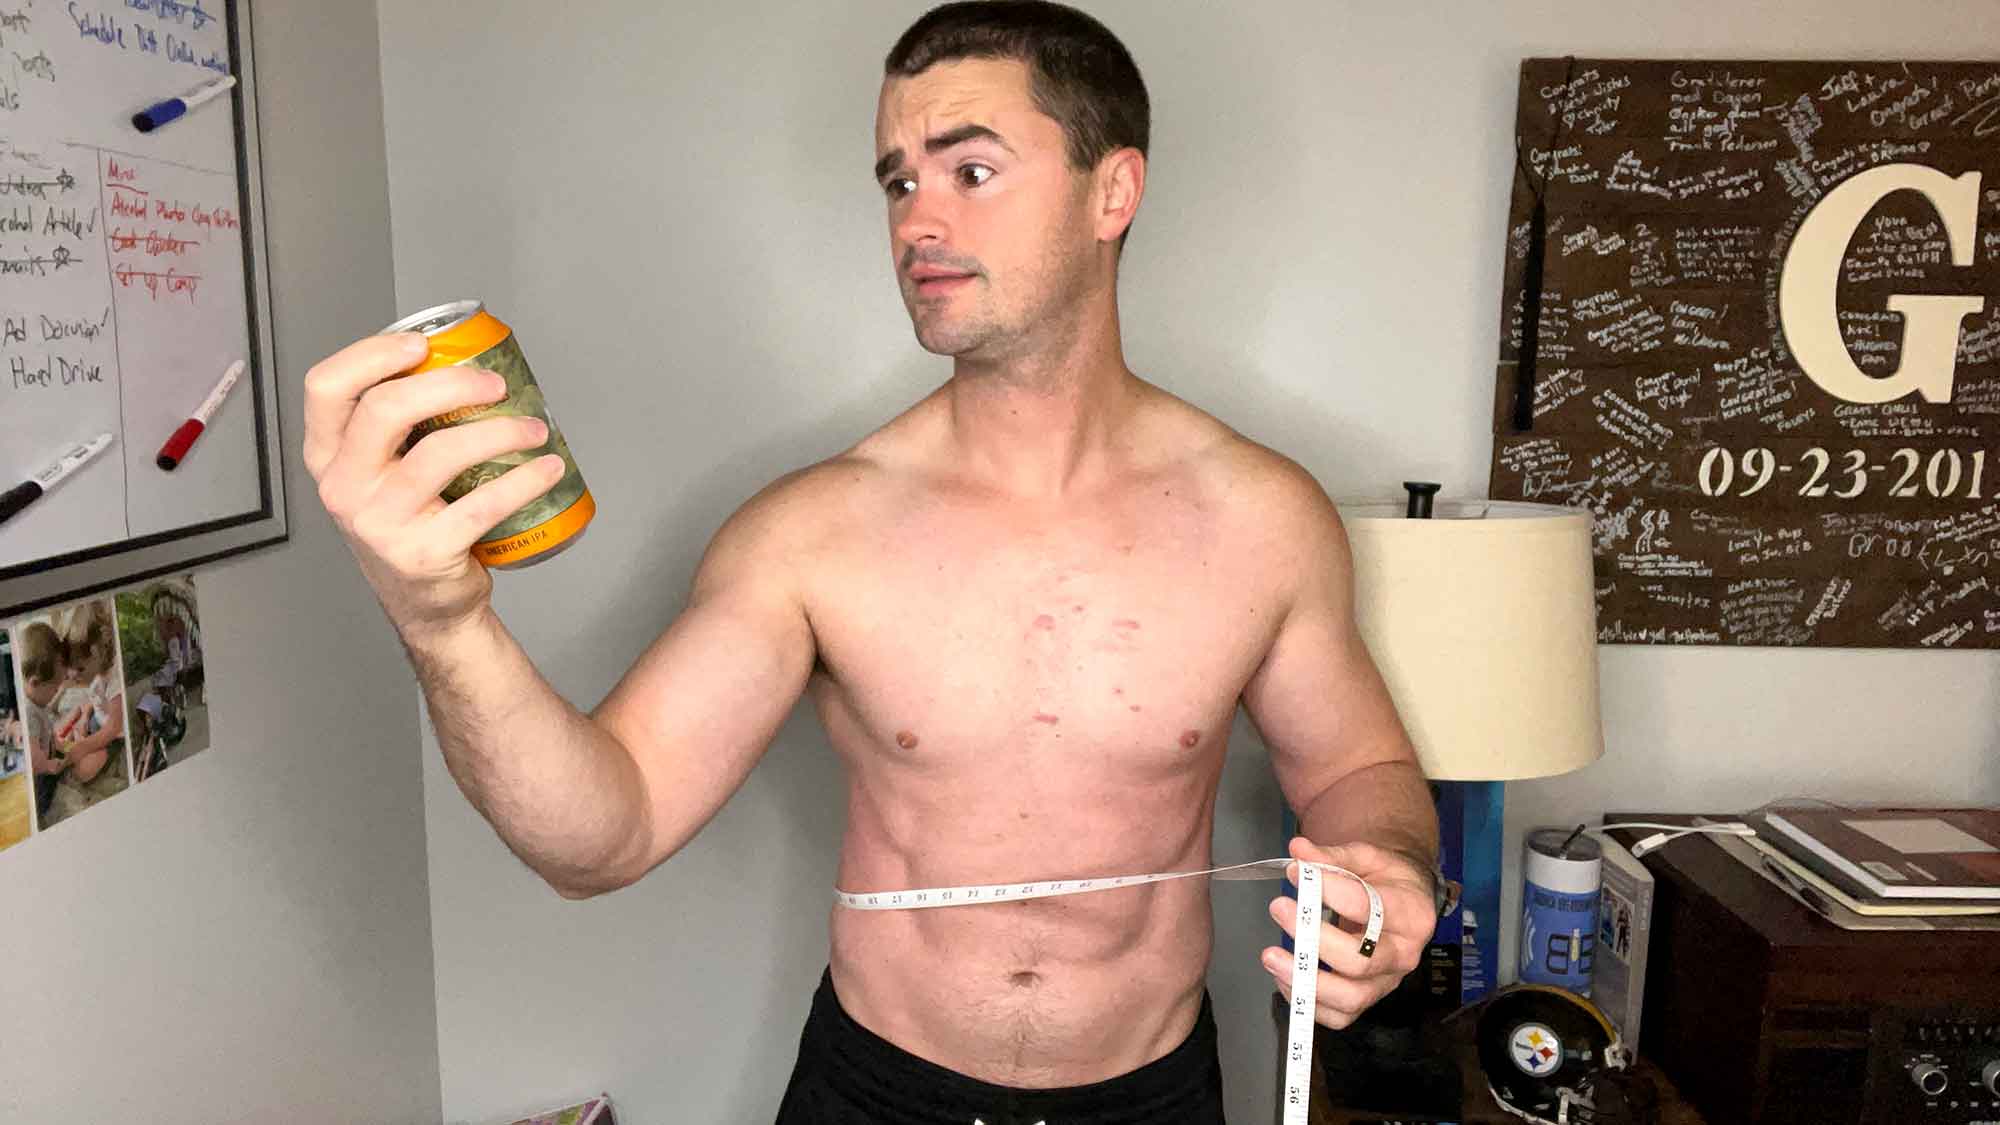 Chris holding a beer and a tape measure with a concerned look on his face